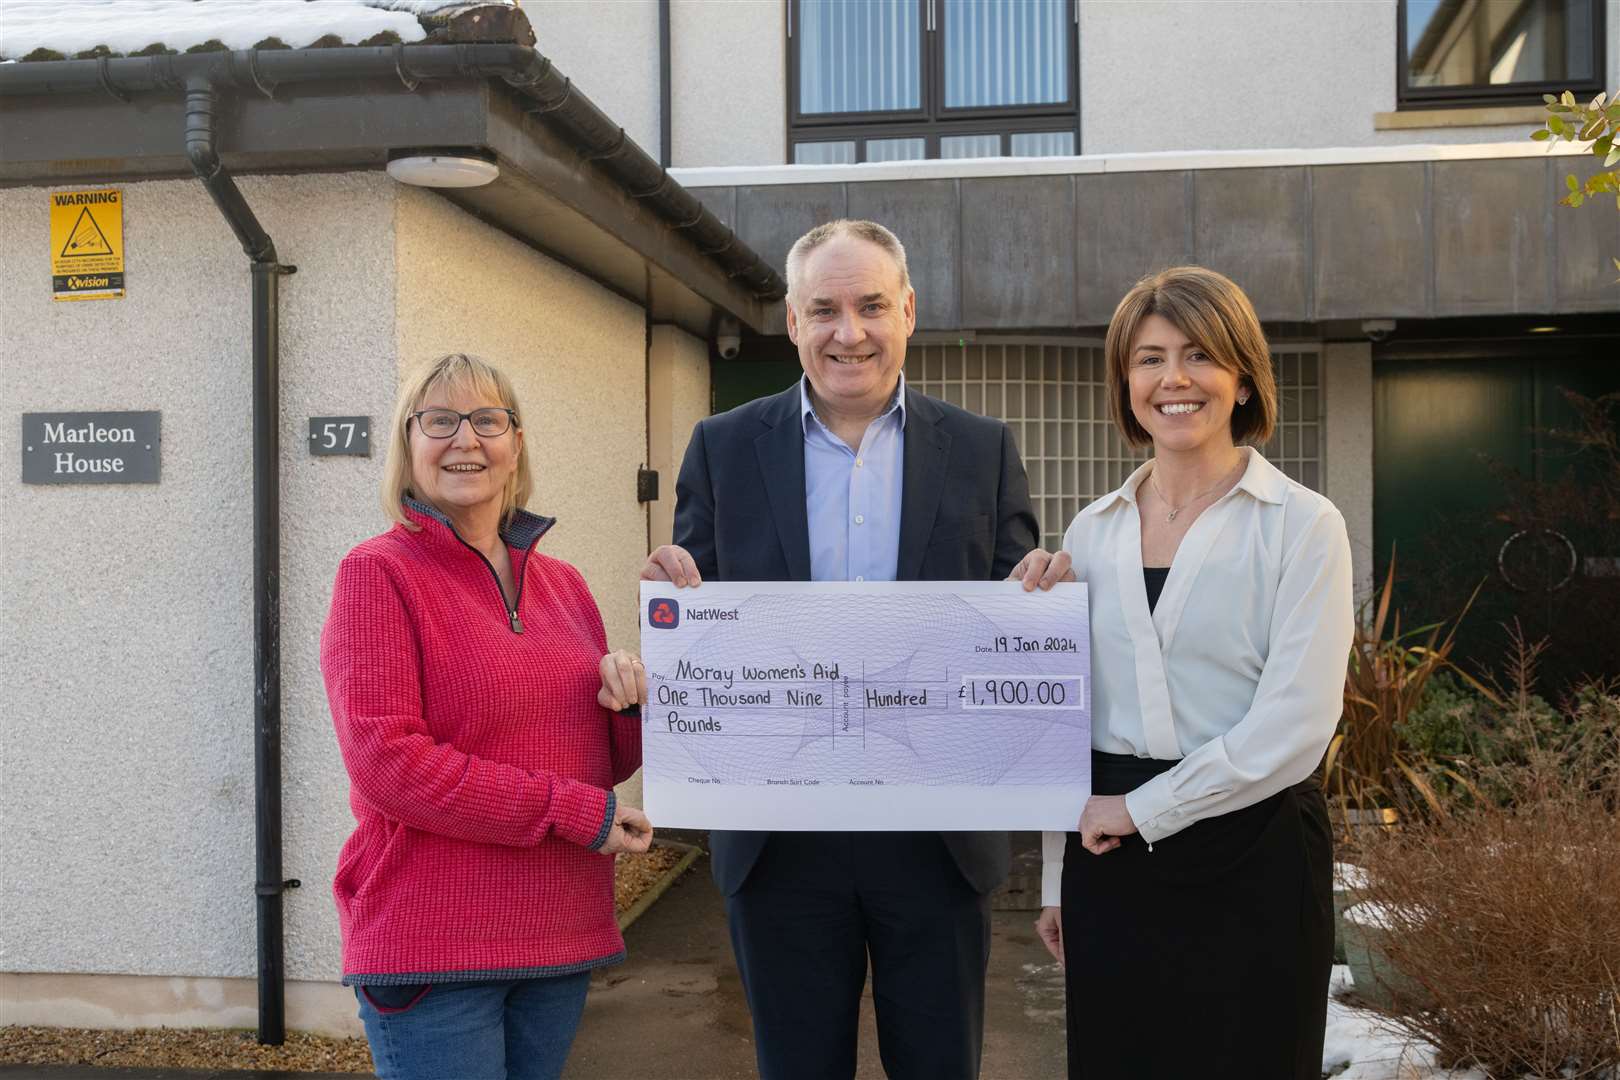 Richard Lochhead MSP handing over a cheque to Moray Women's Aid manager Elle Johnston for £1900 with sponsor Diane Kemp (Springfield, Group HR Manager) with the generous sponsorship of his charity Christmas card by local businesses...Picture: Beth Taylor